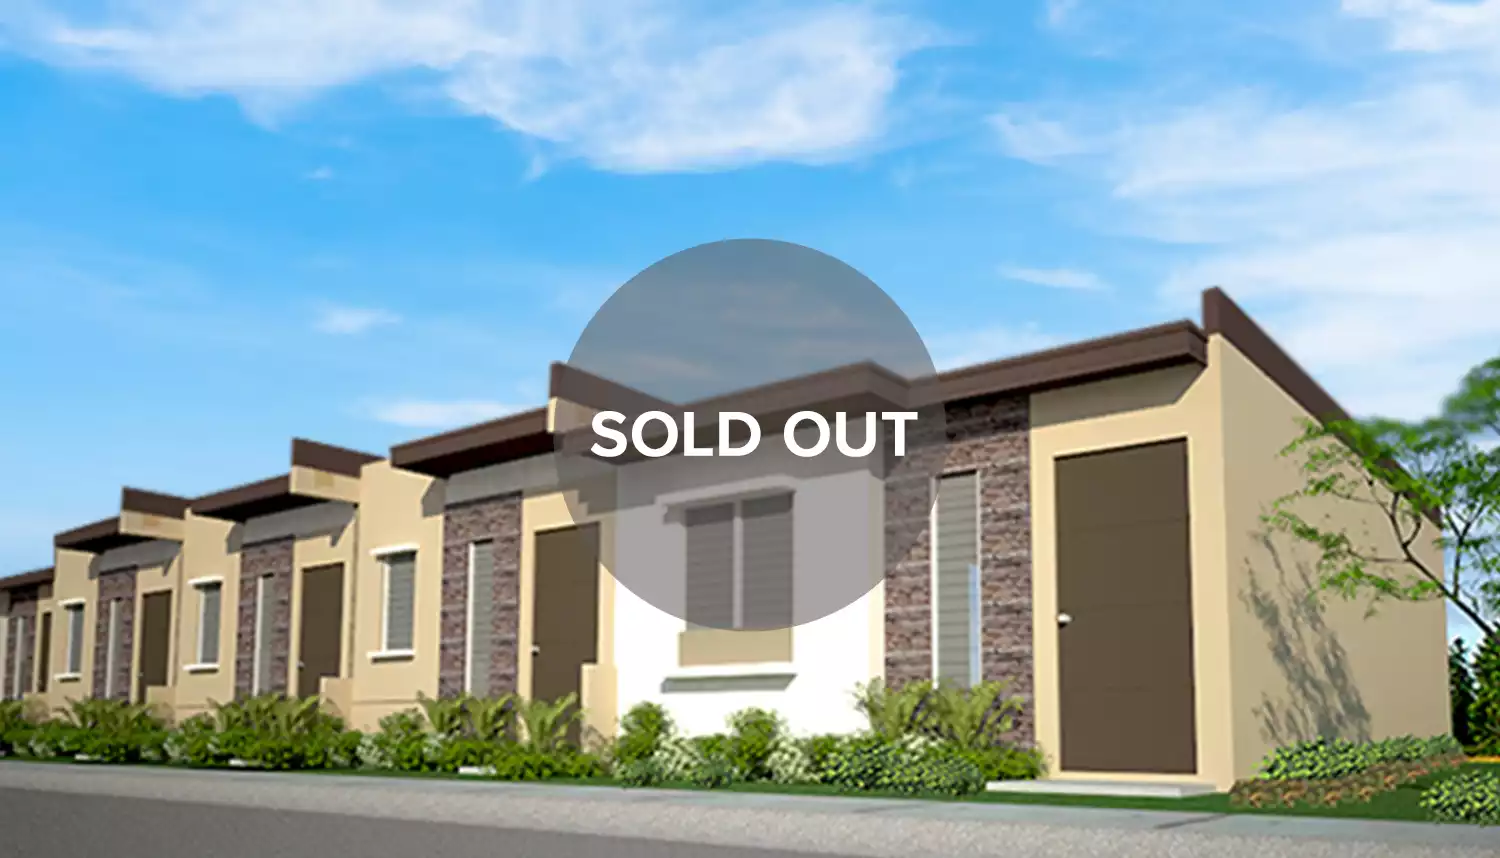 lumina aira rowhouse sold out  | Affordable House and Lot For Sale In The Philippines